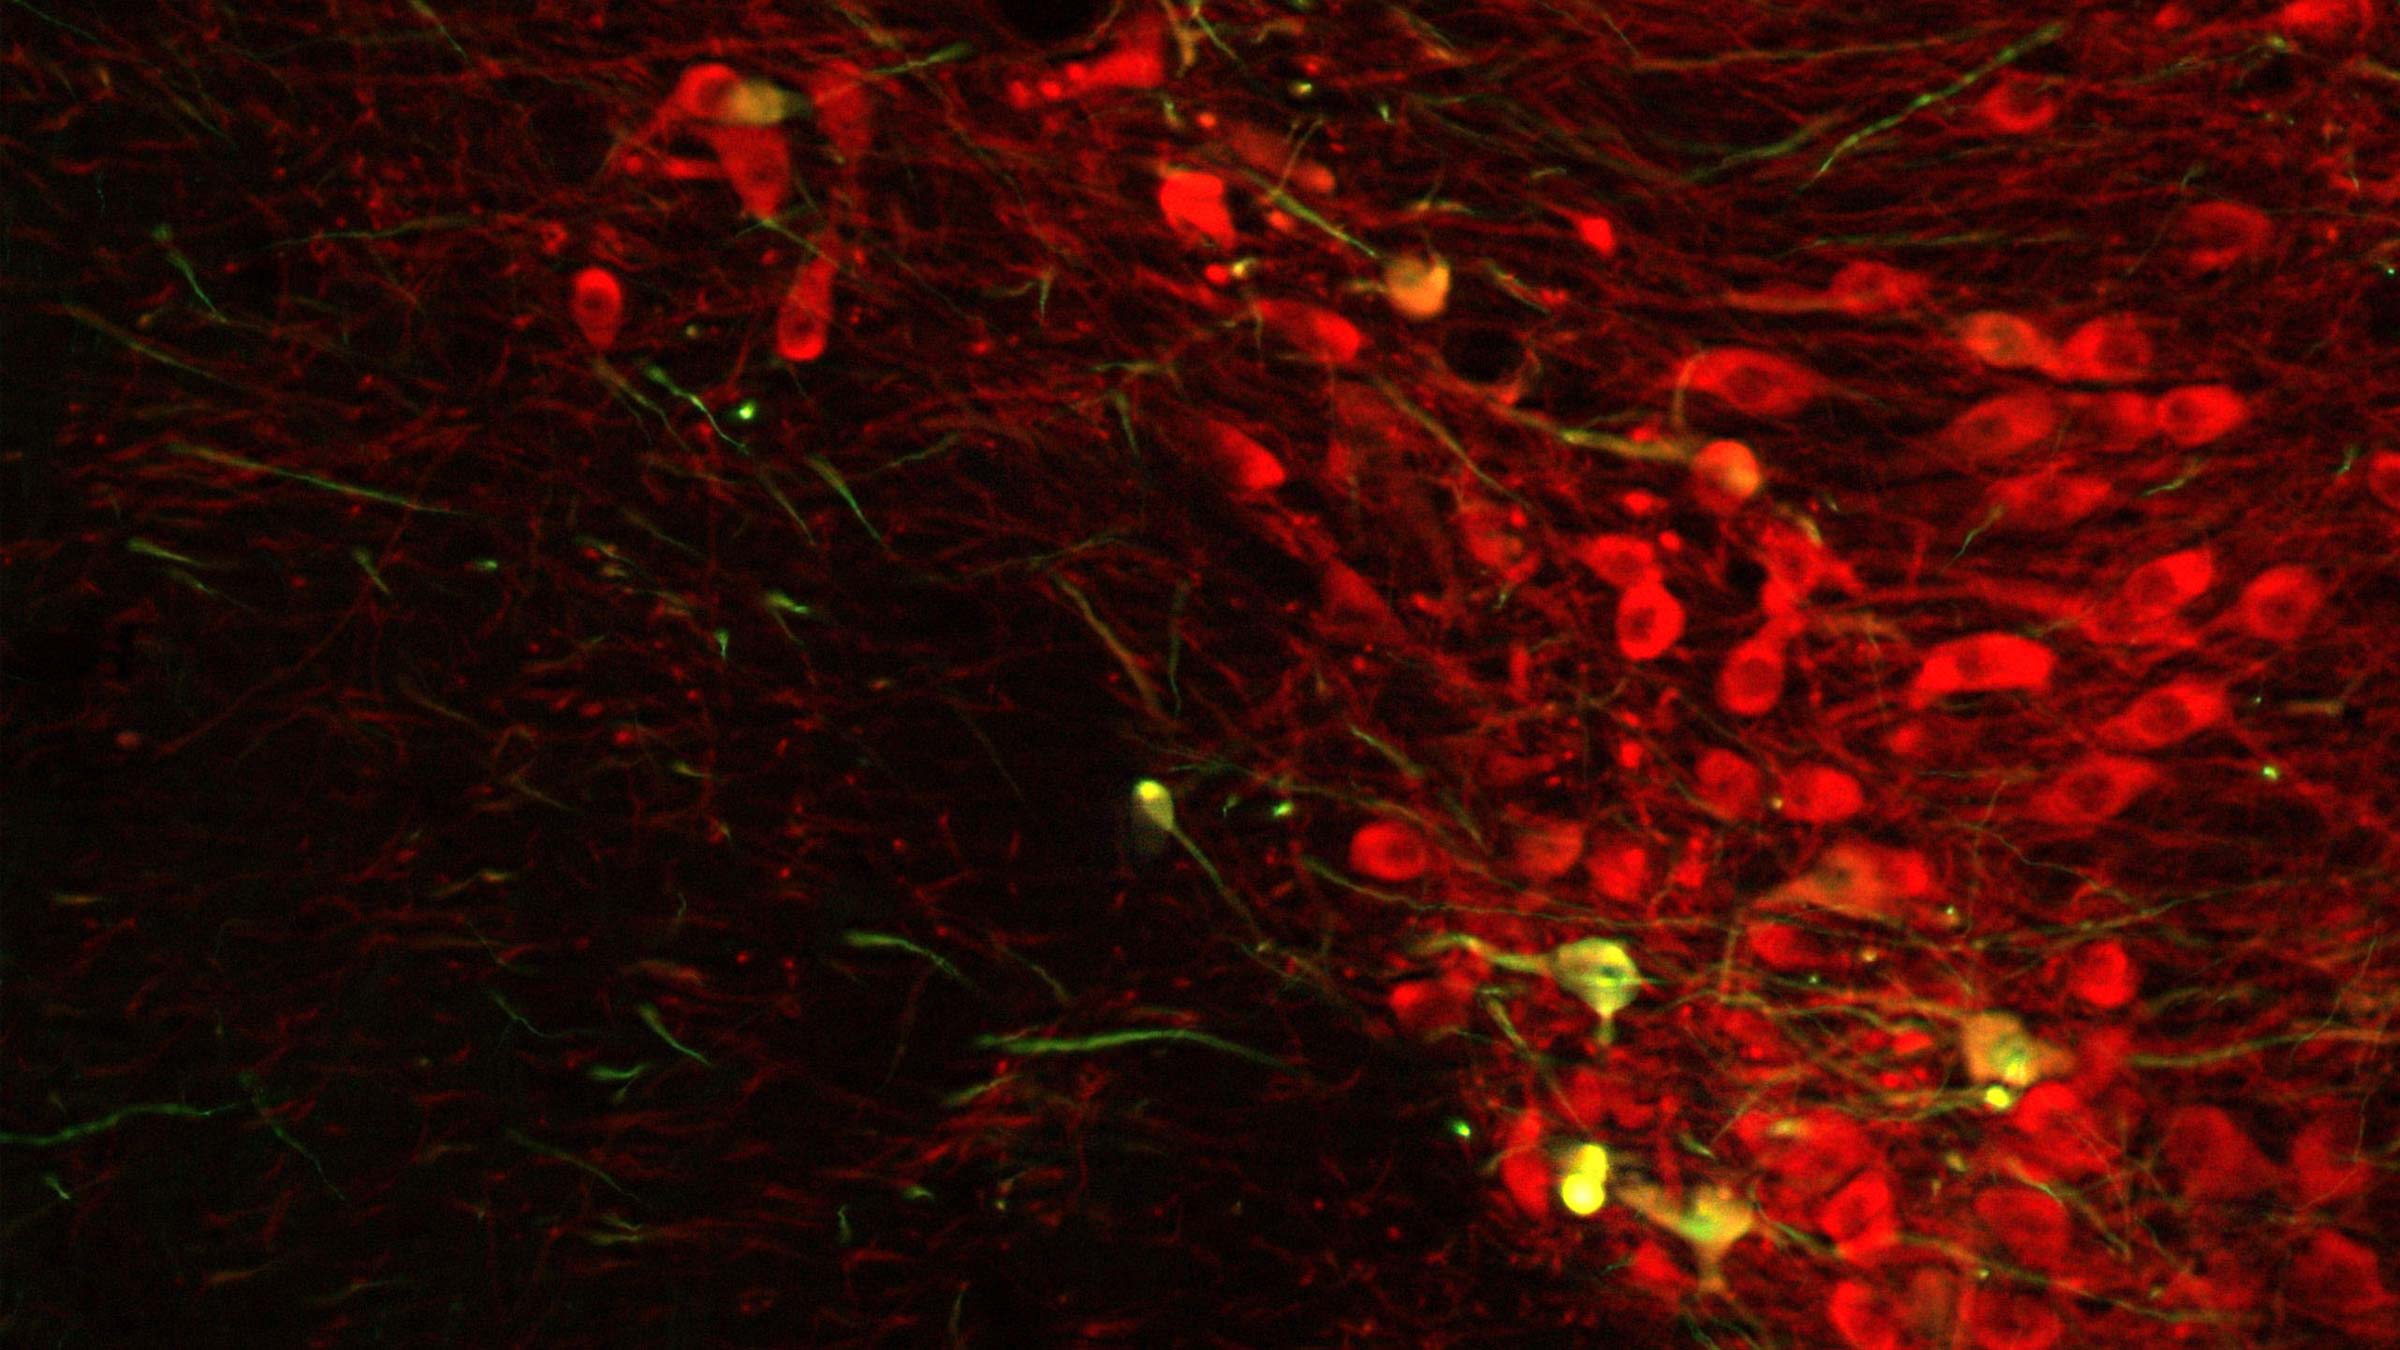 Microimaging of the neurological cells in the brain